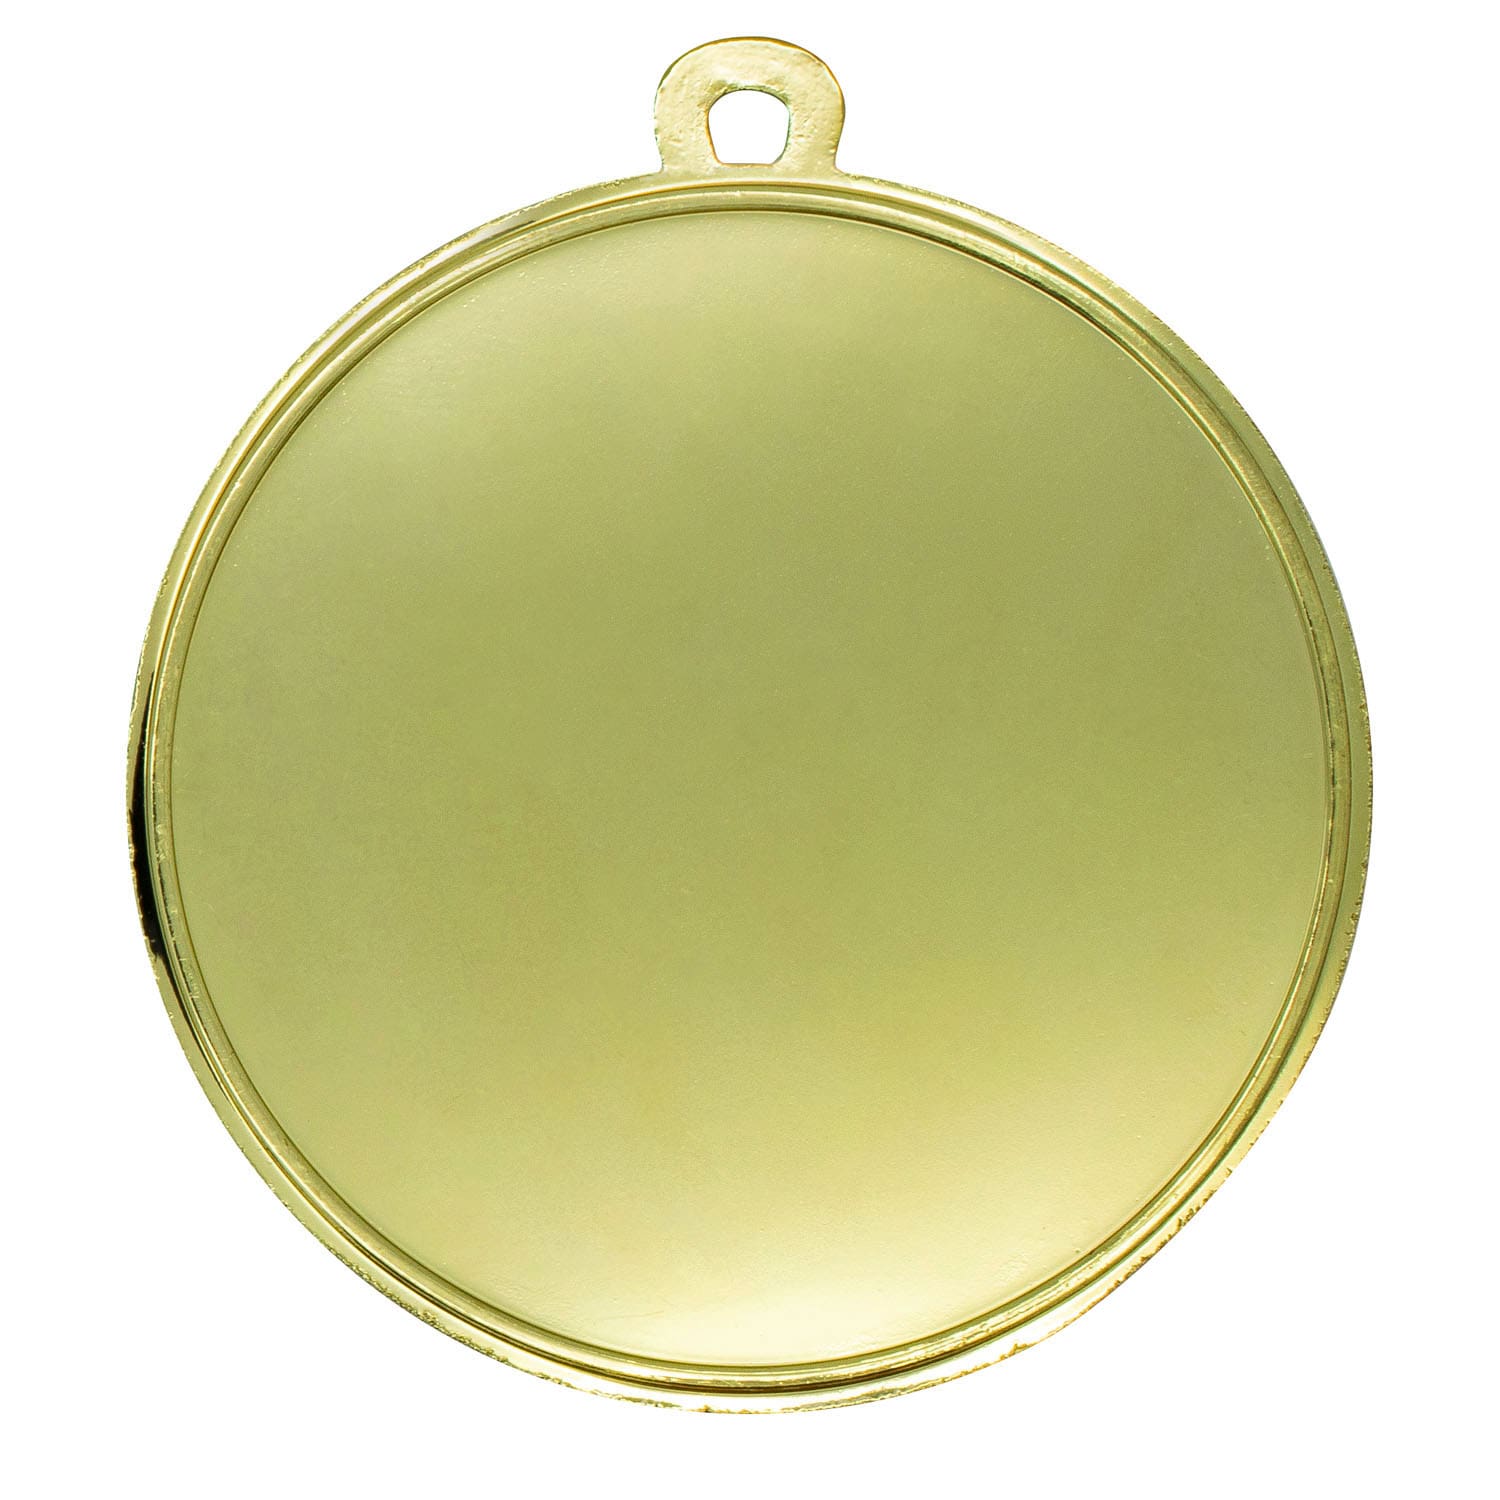 Medaille "Football" Ø 65mm gold mit Band